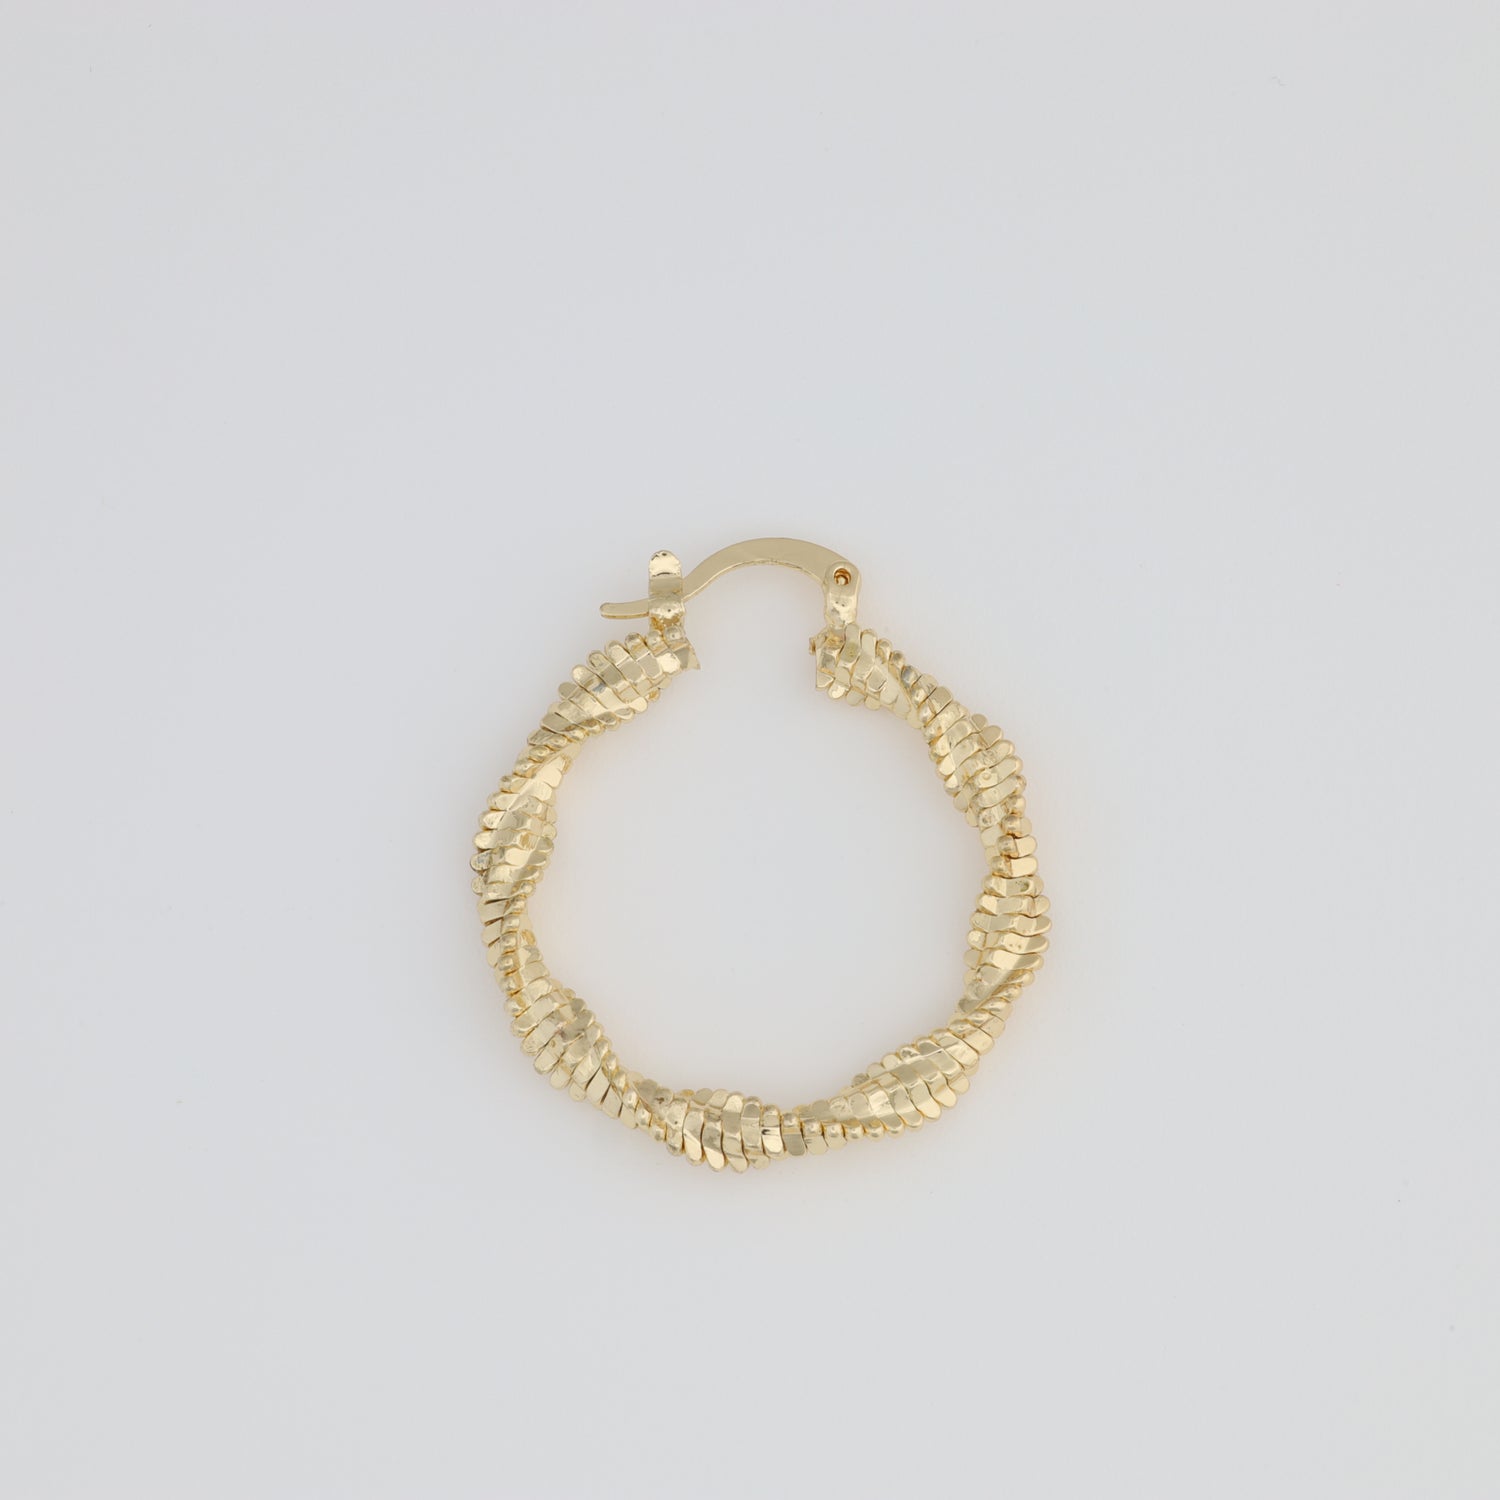 Textured Twisted And Intertwined Hoop Earring